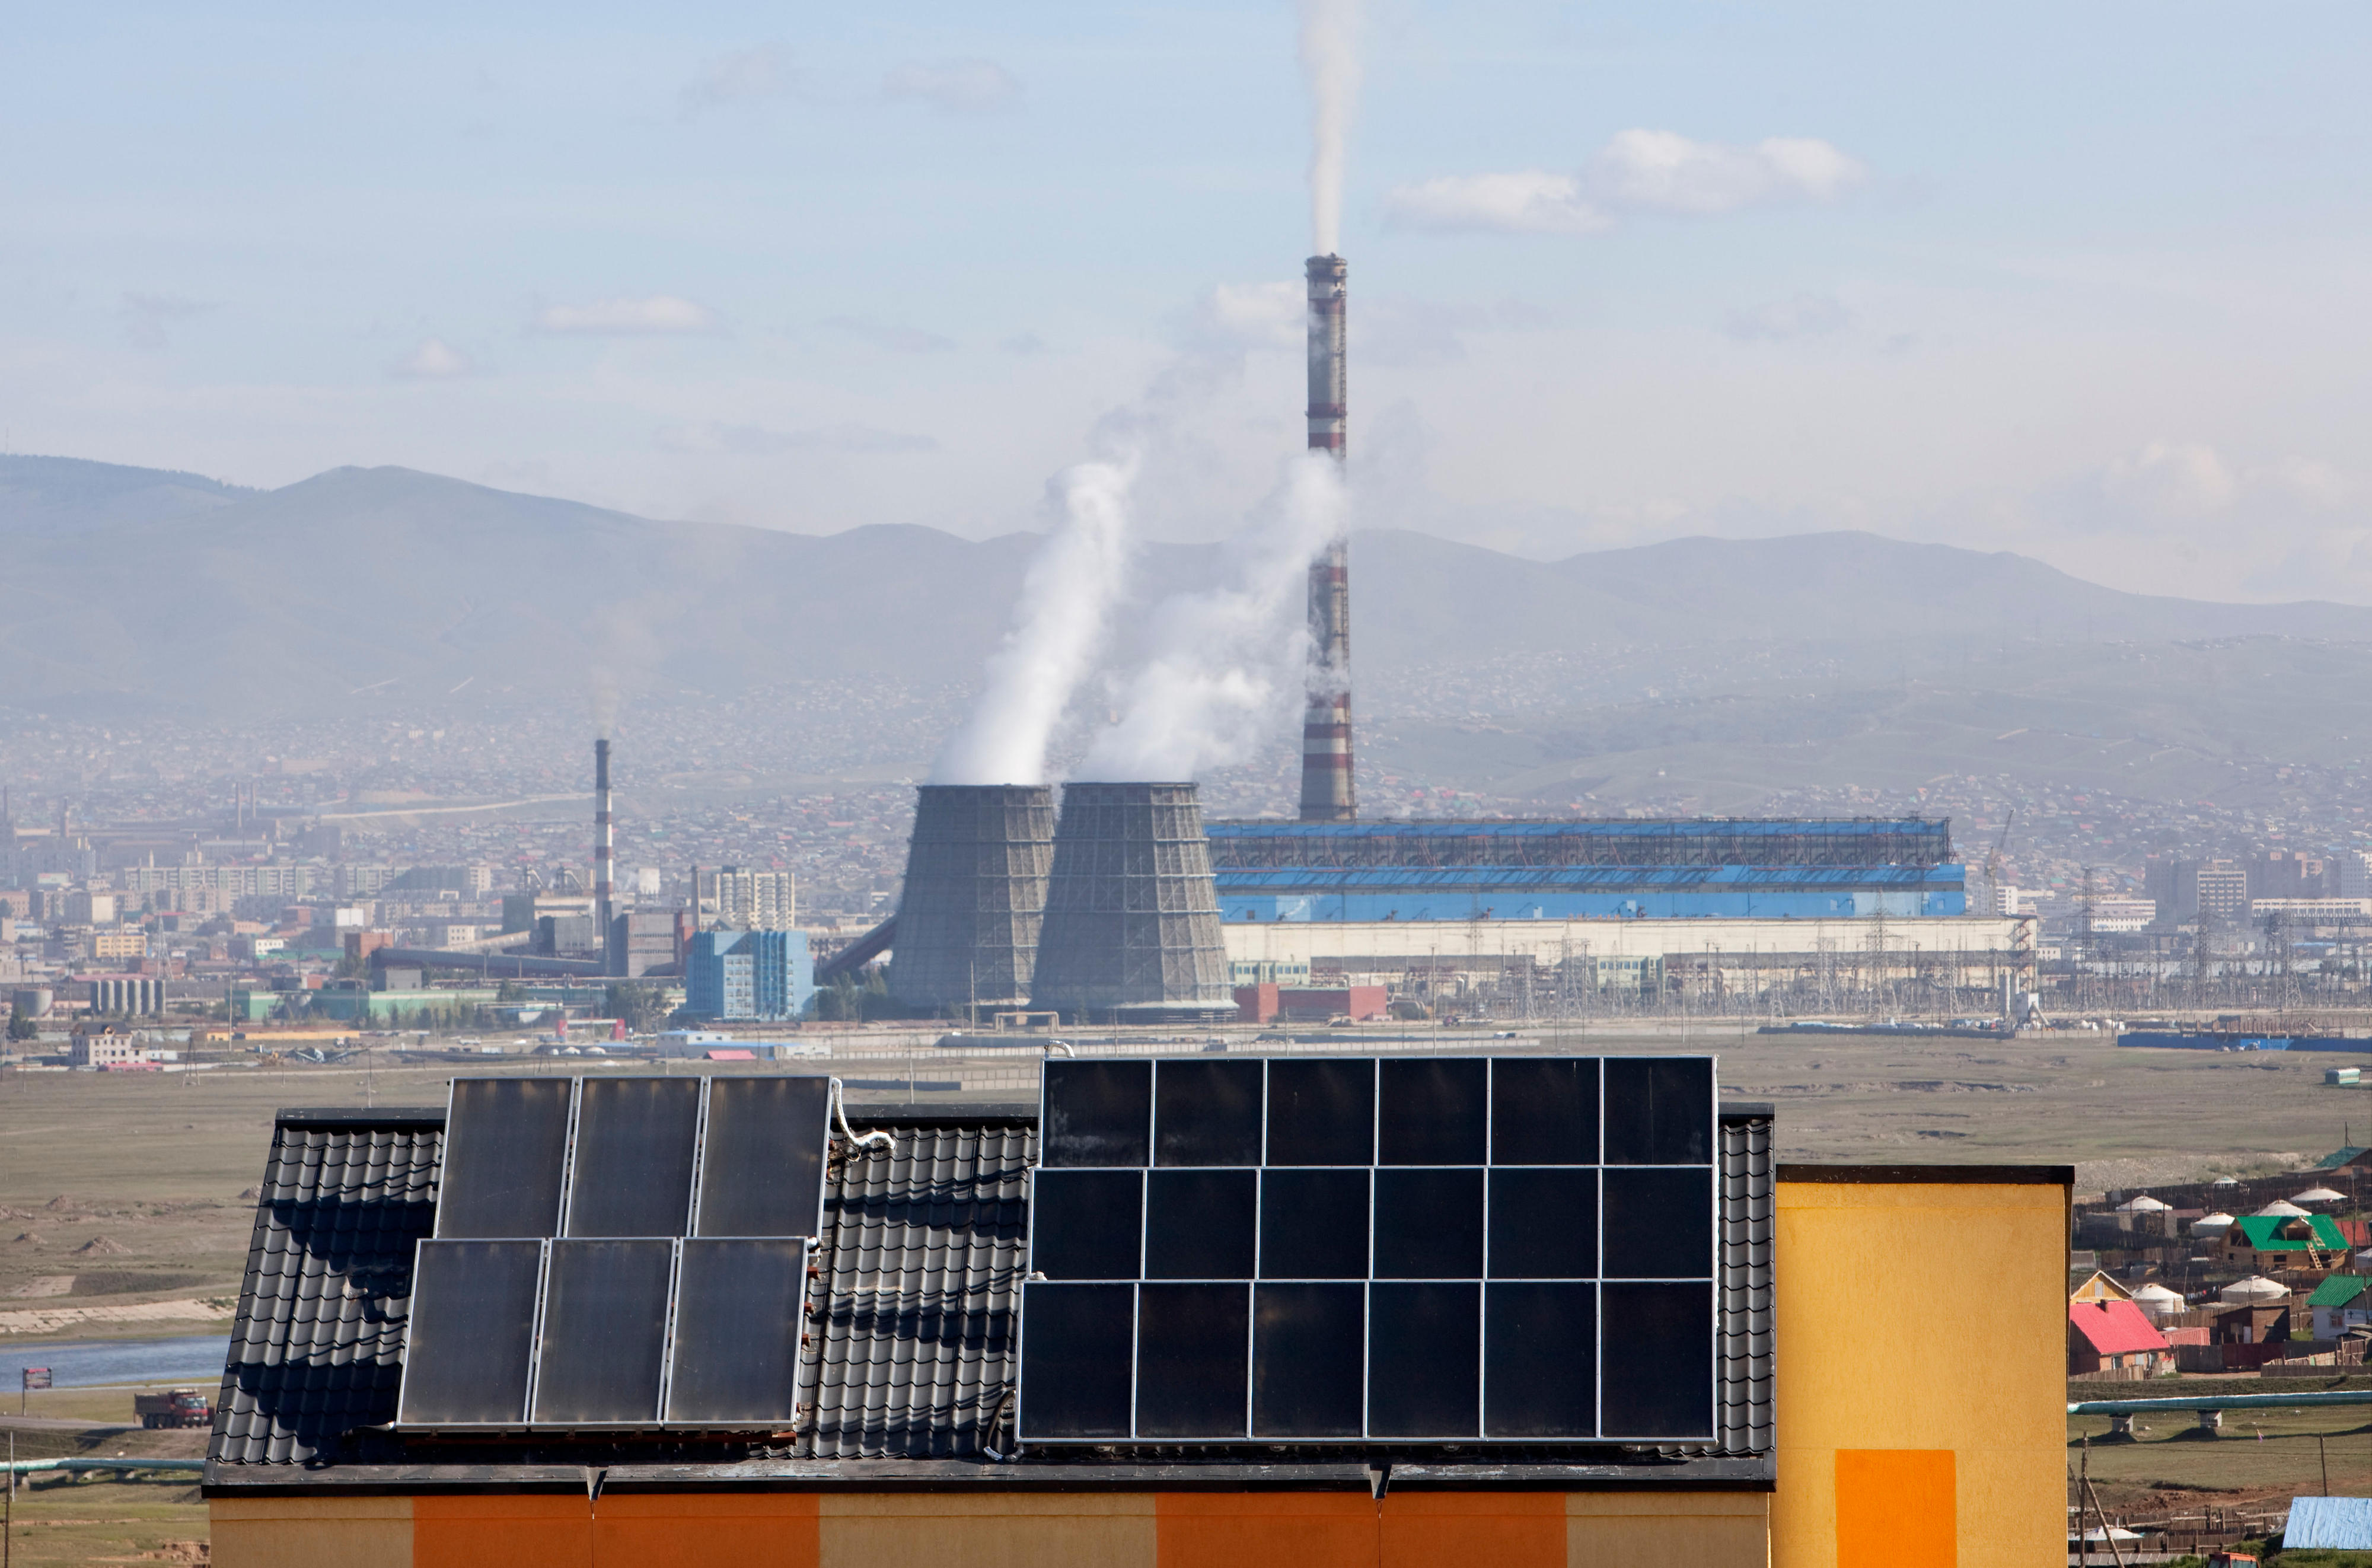 Solar plant and coal-fired power station in Ulan Bator, Mongolia